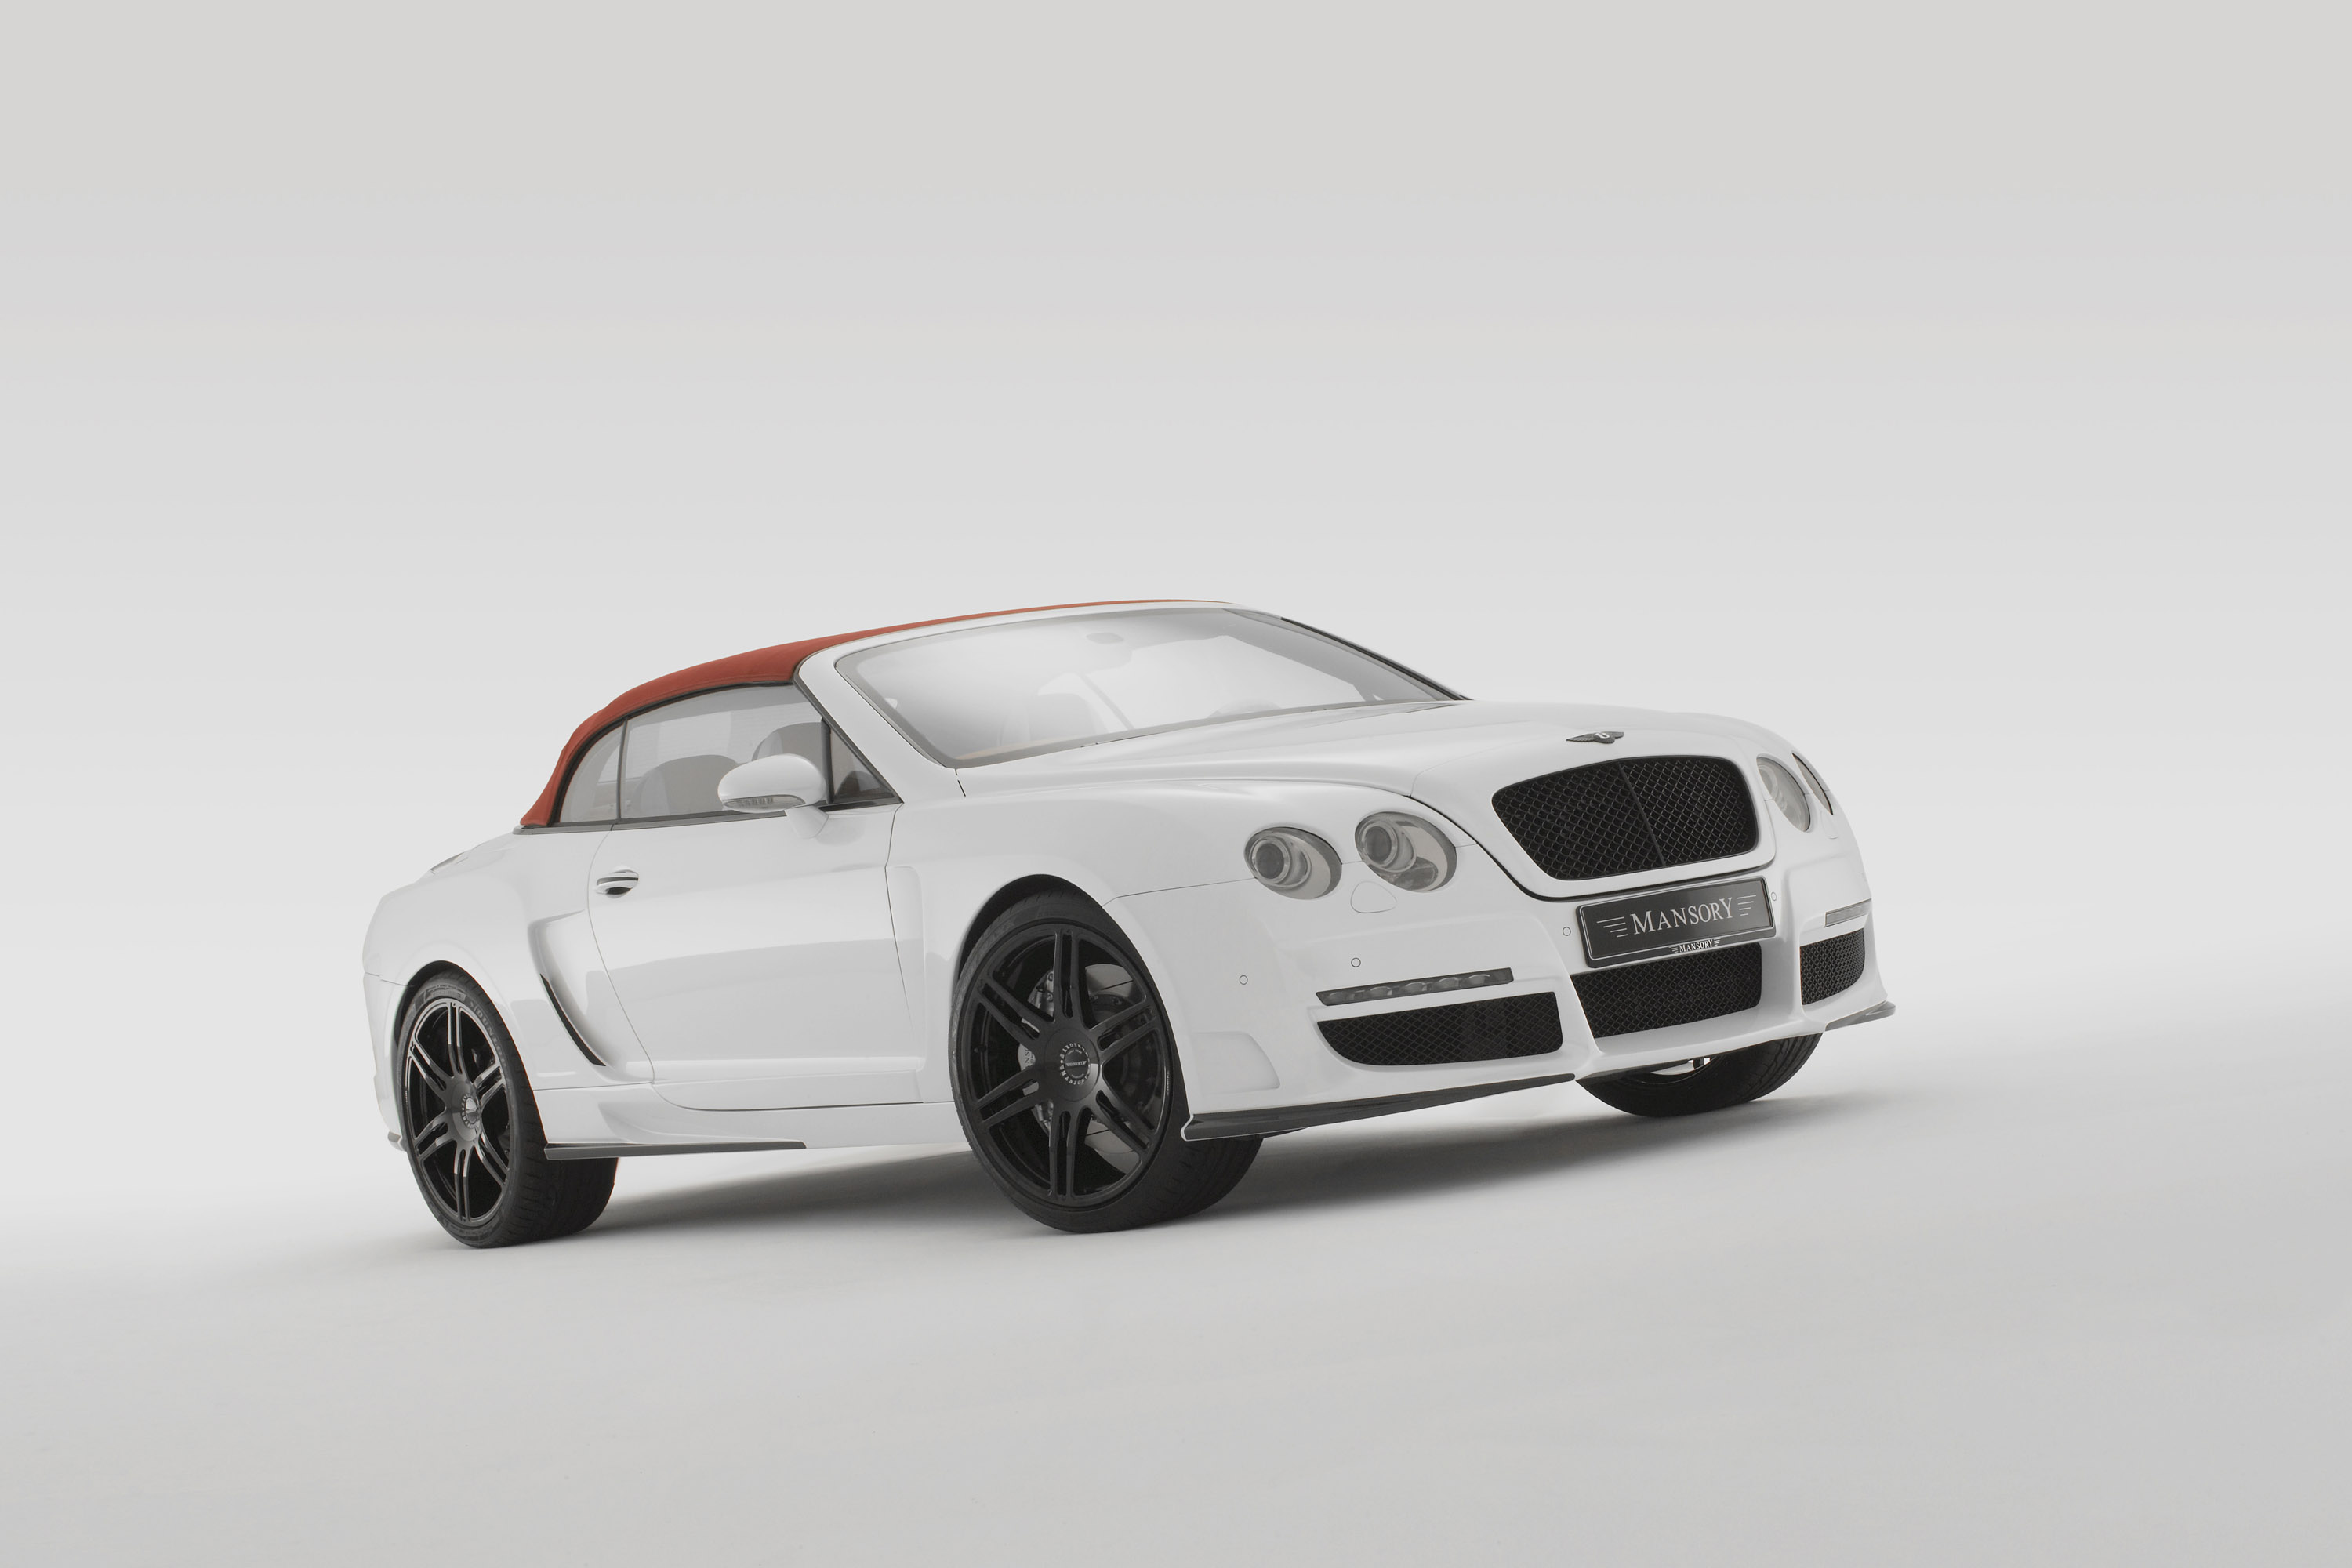 LE MANSORY Bentley Continental GTC photo #1